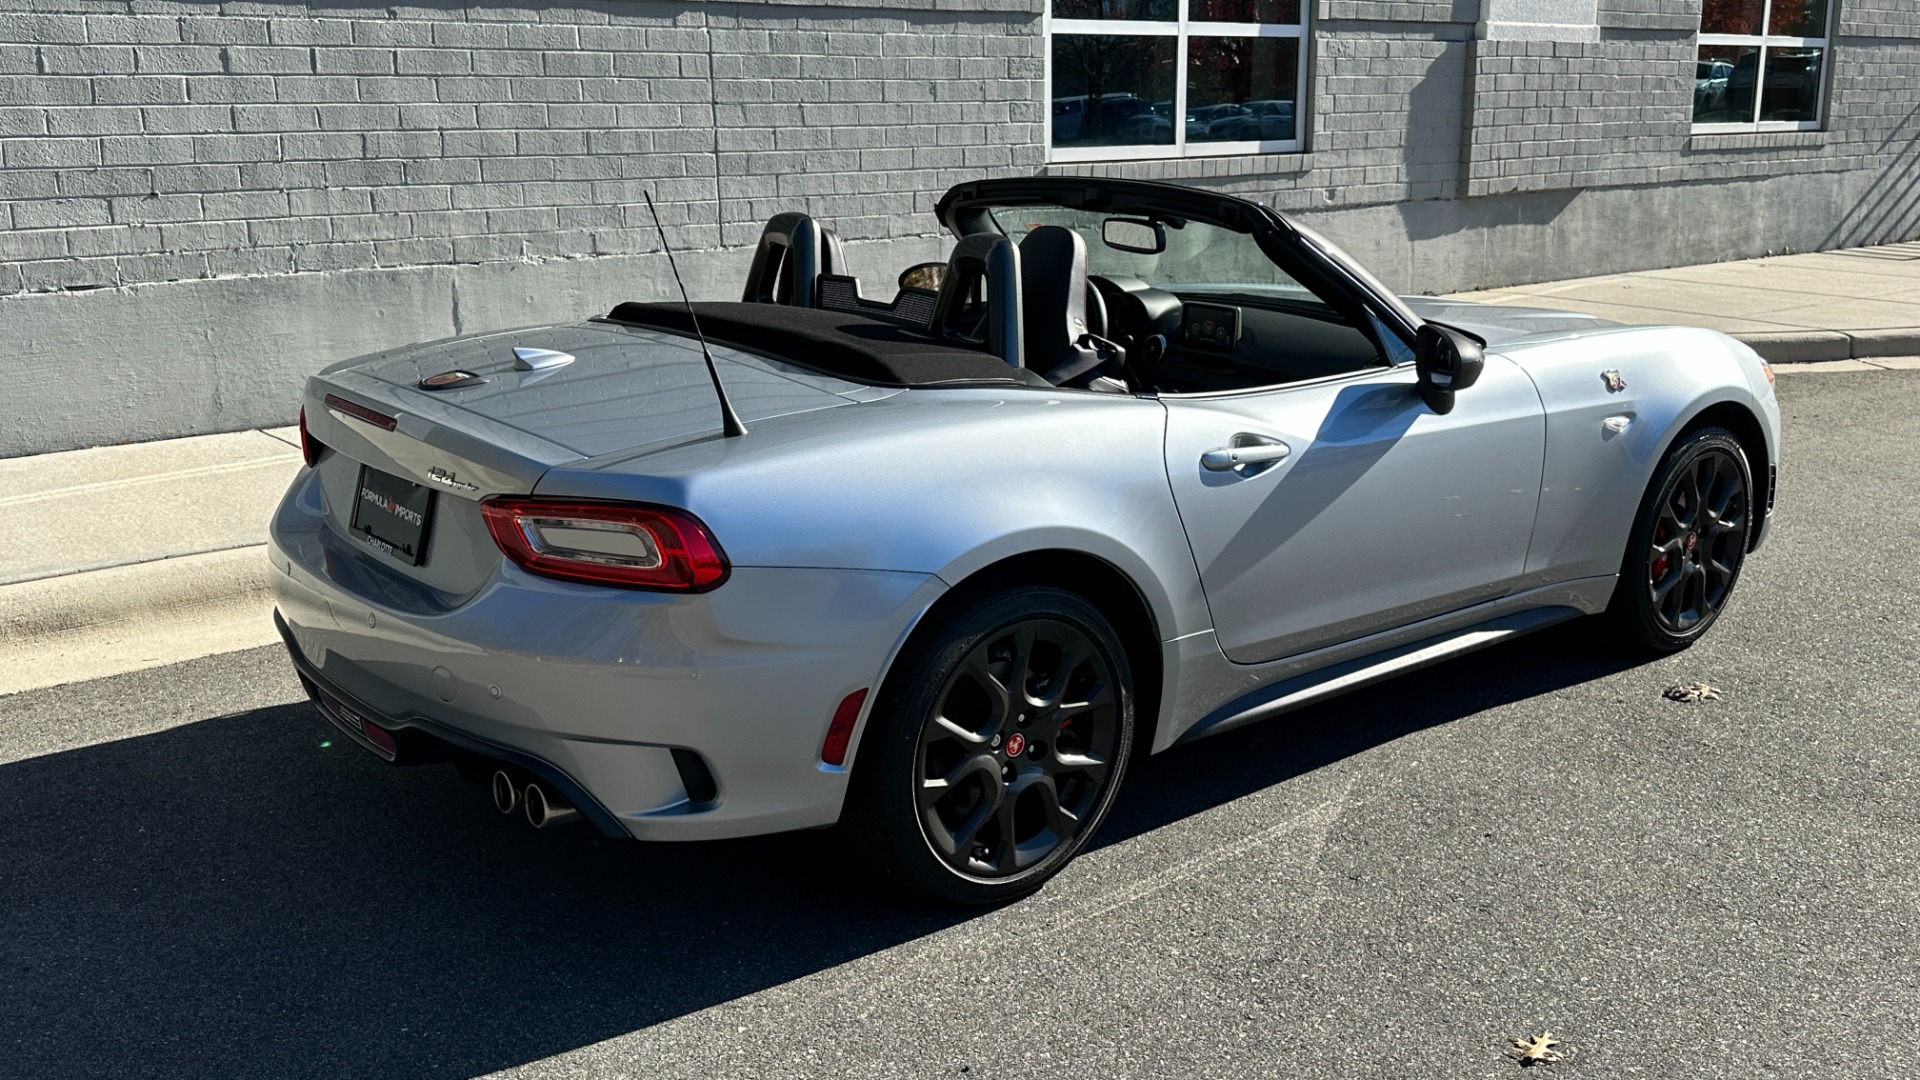 Used 2020 FIAT 124 Spider ARBARTH / MONZA EXHAUST / RECARO SPORT SEATS / BREMBO BRAKES / 6 SPEED for sale $29,995 at Formula Imports in Charlotte NC 28227 2